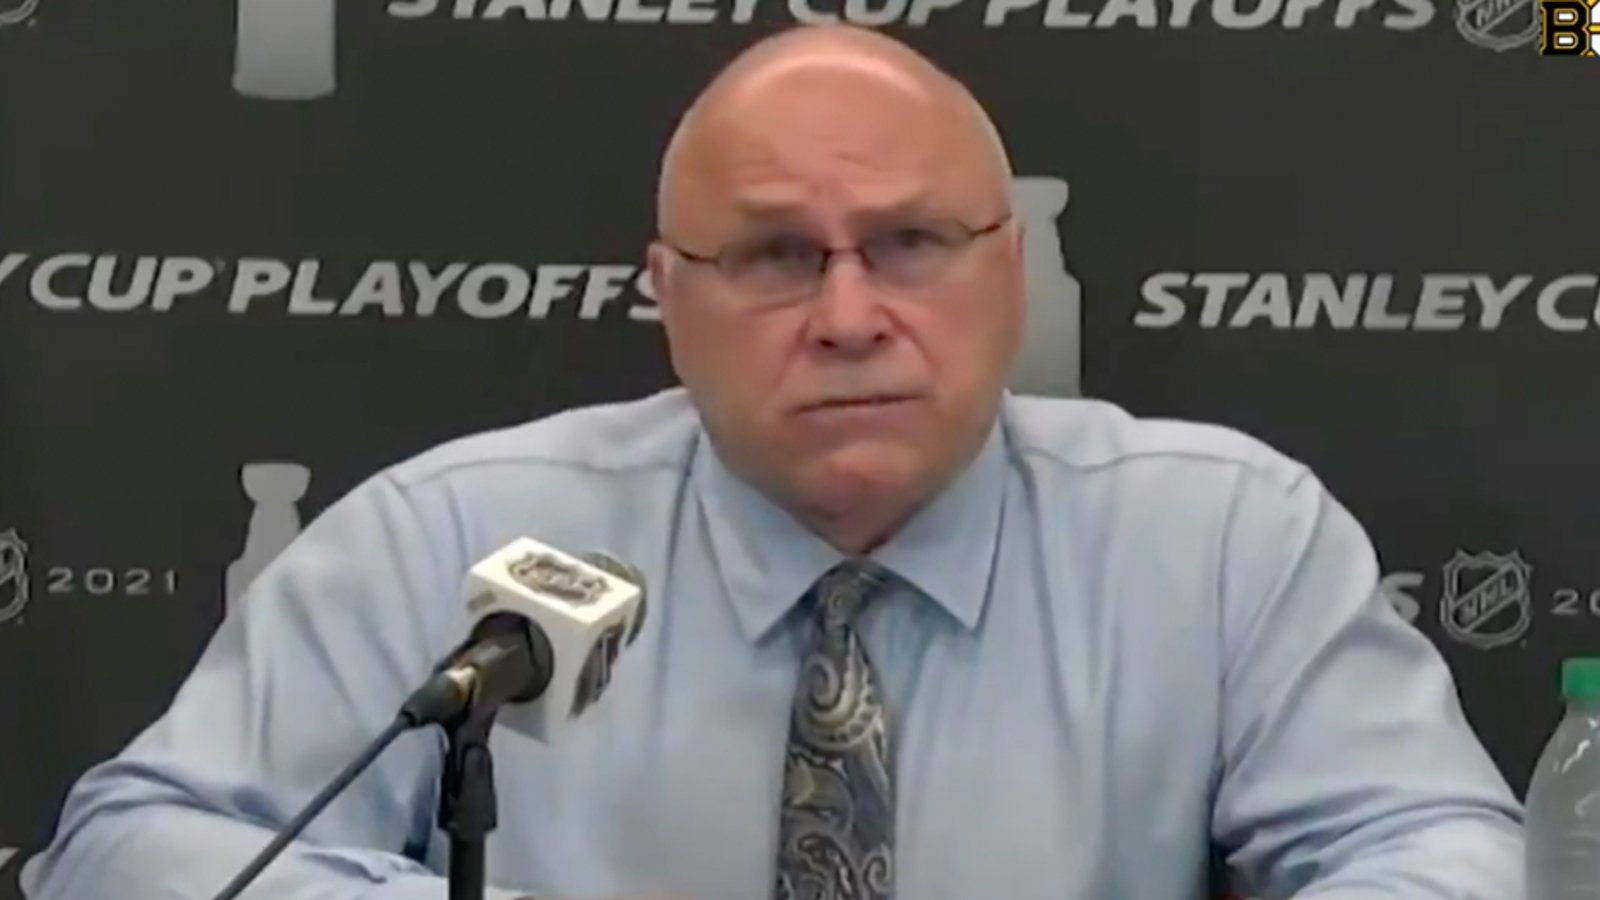 Barry Trotz fires back at Bruce Cassidy and his claim that the Islanders get special treatment